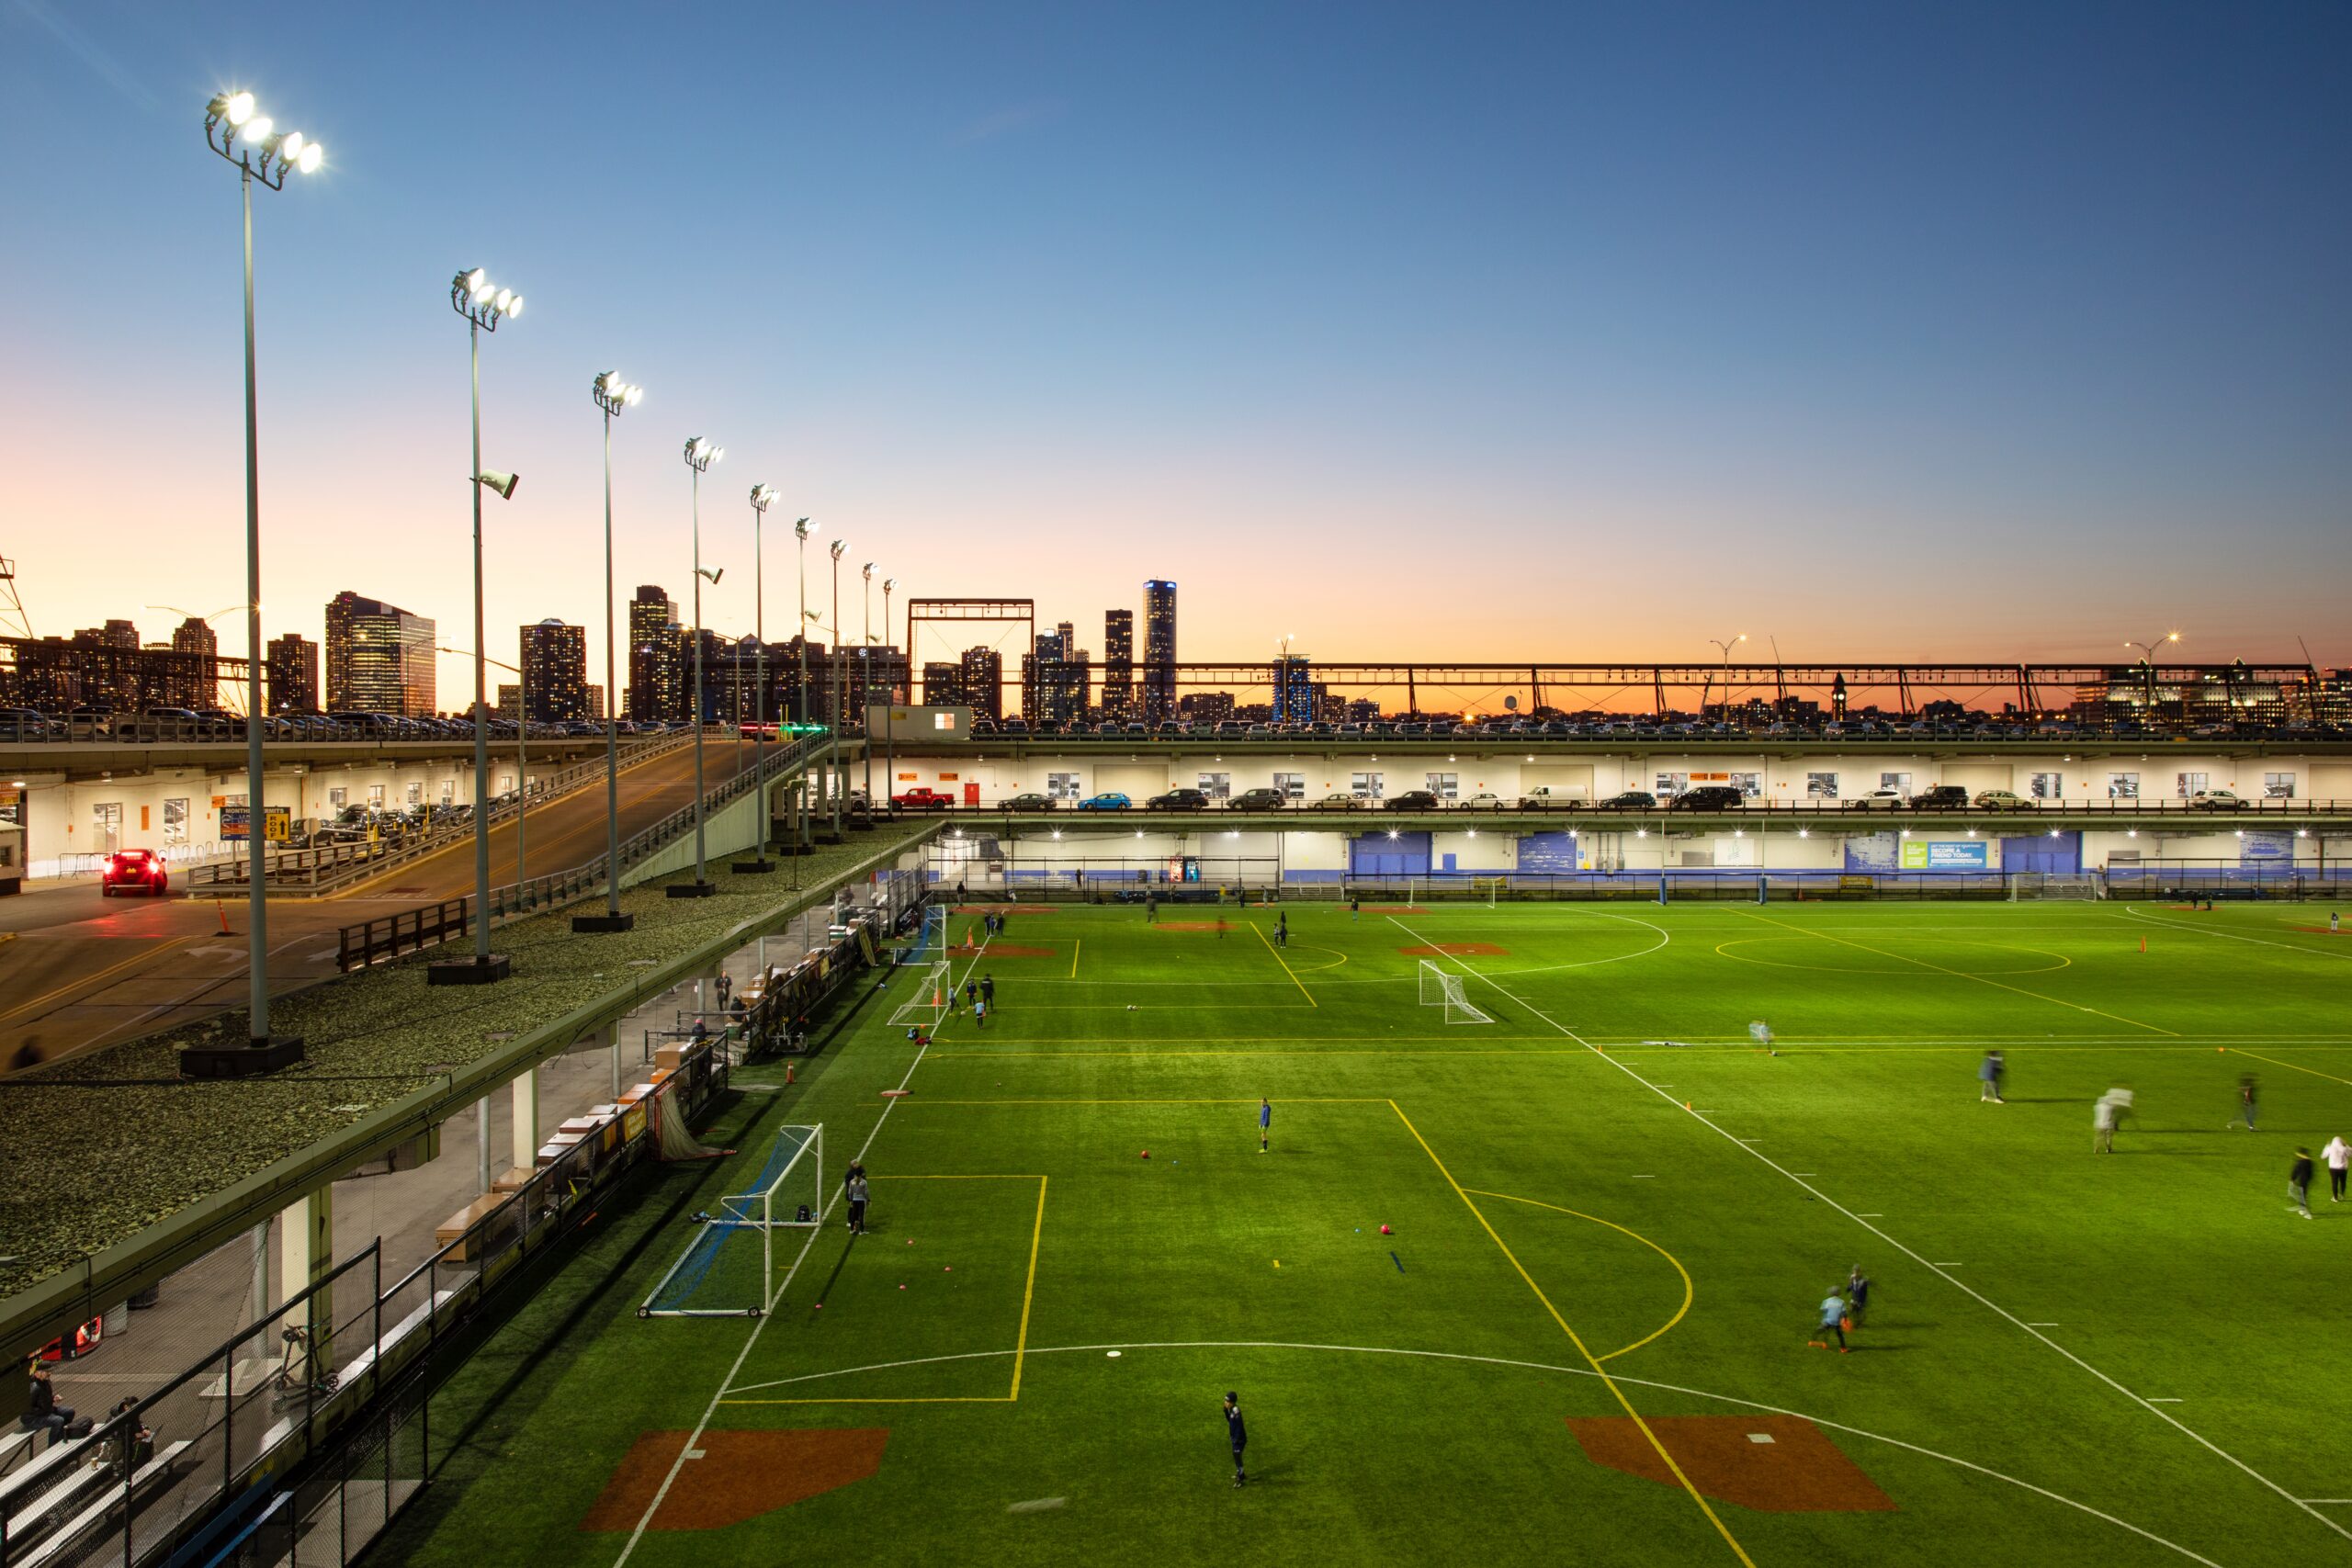 The Pier 40 courtyard athletic fields at sunset